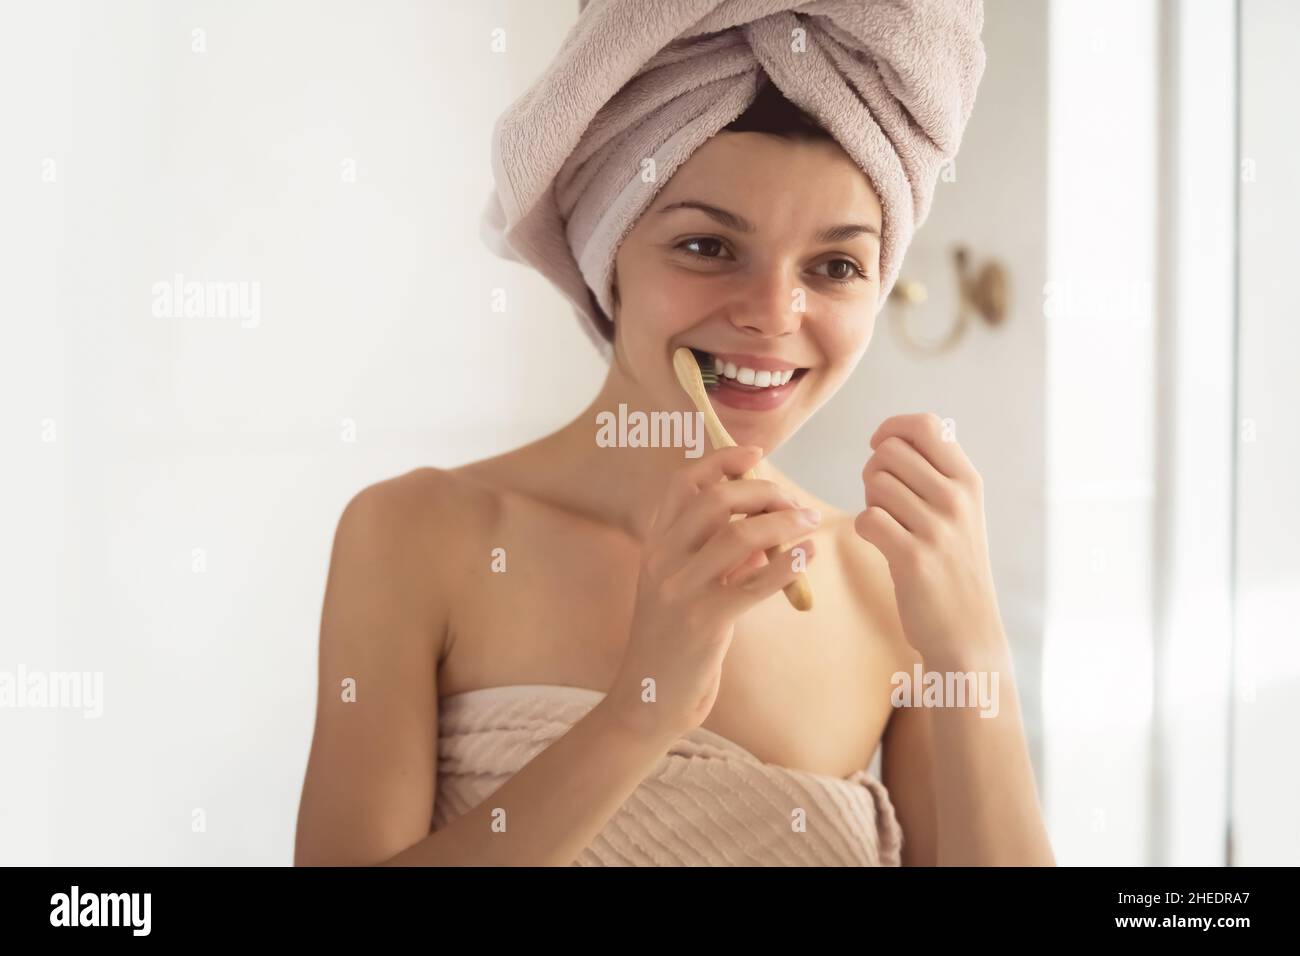 Woman brushes her teeth near the mirror. Stock Photo